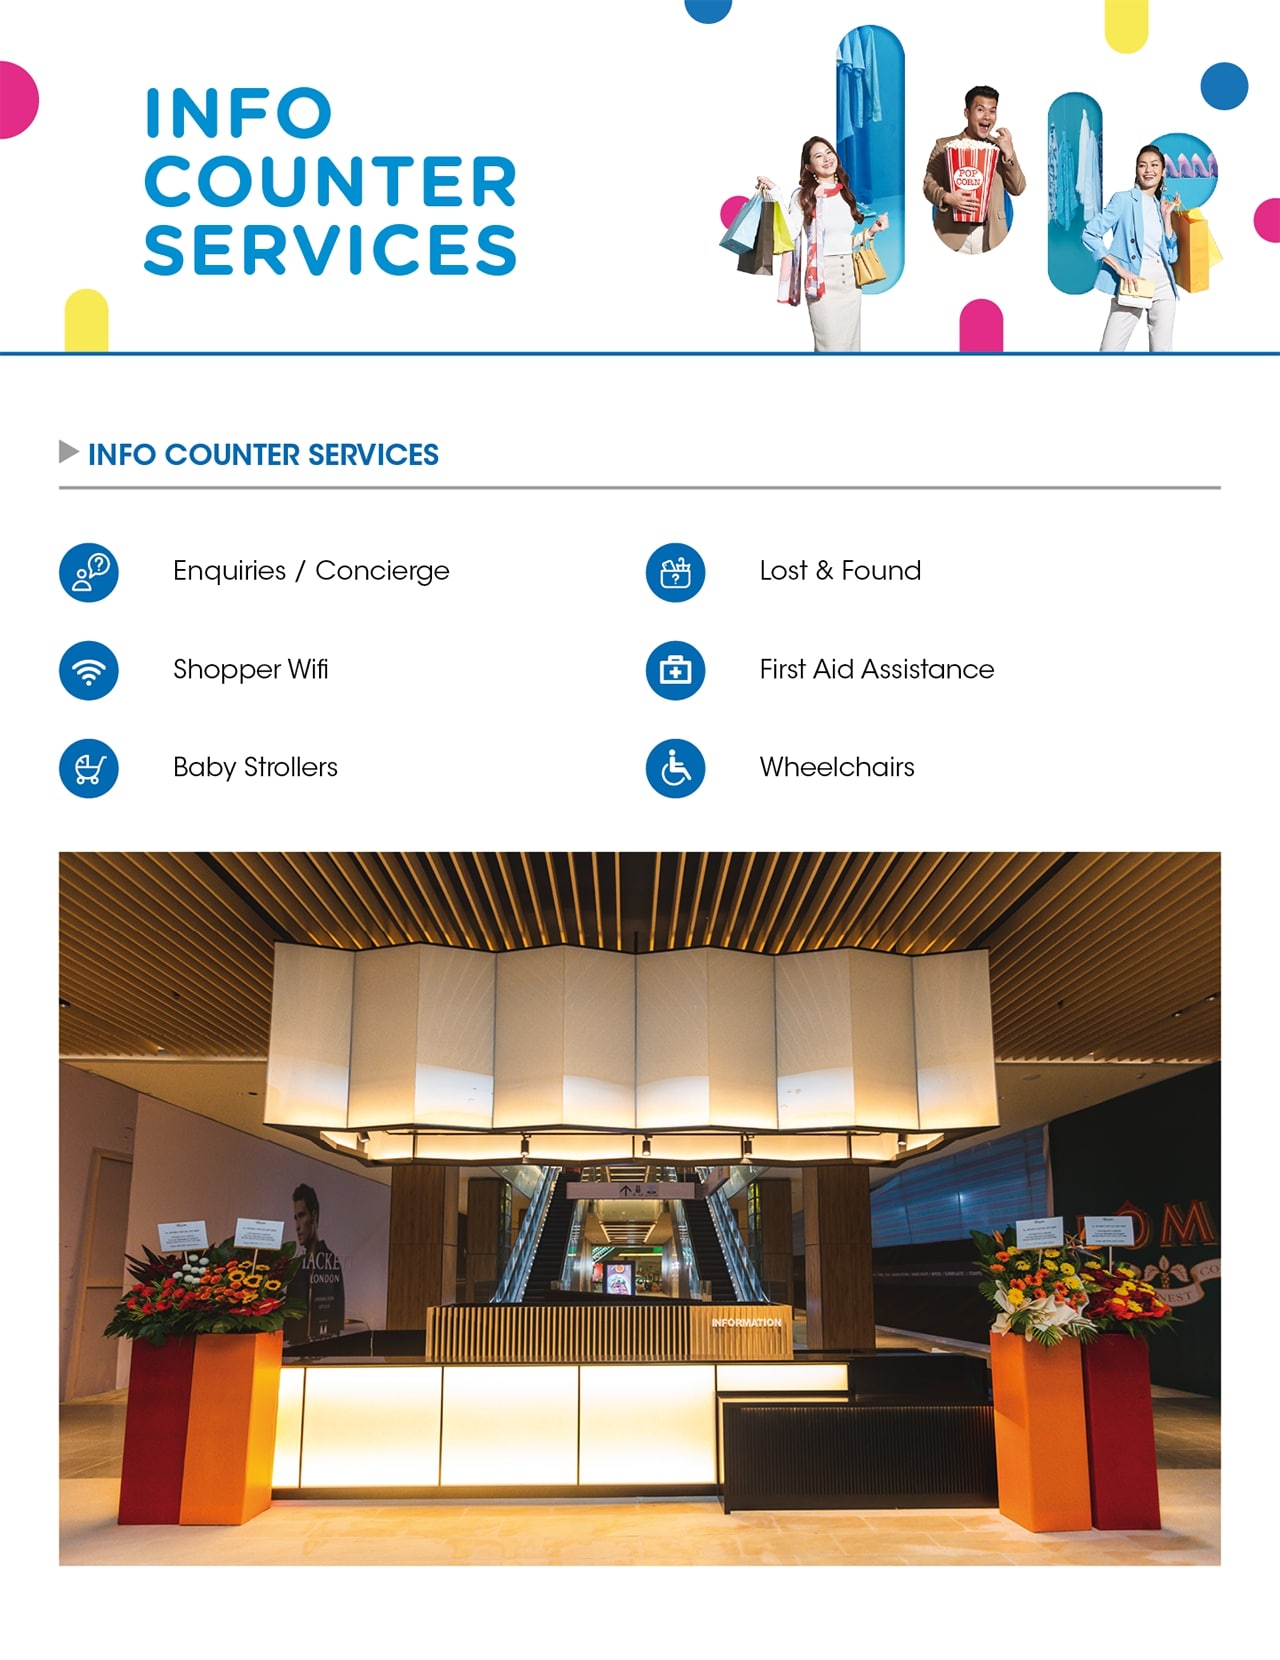 LLP Landing Page - SERVICES Info Counter.jpg